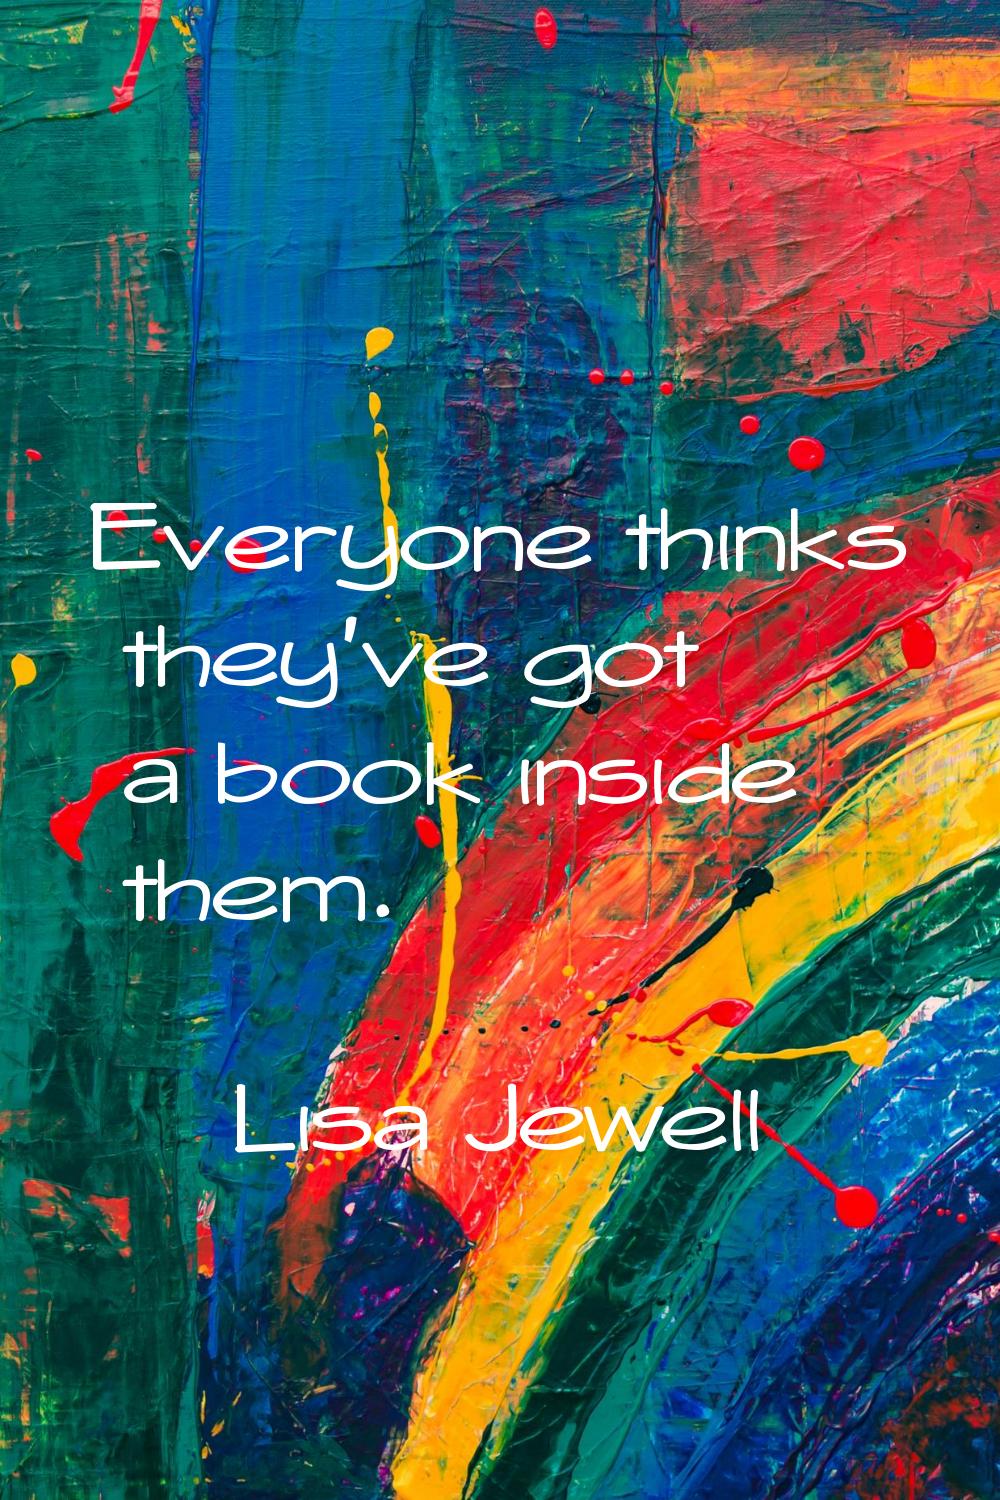 Everyone thinks they've got a book inside them.